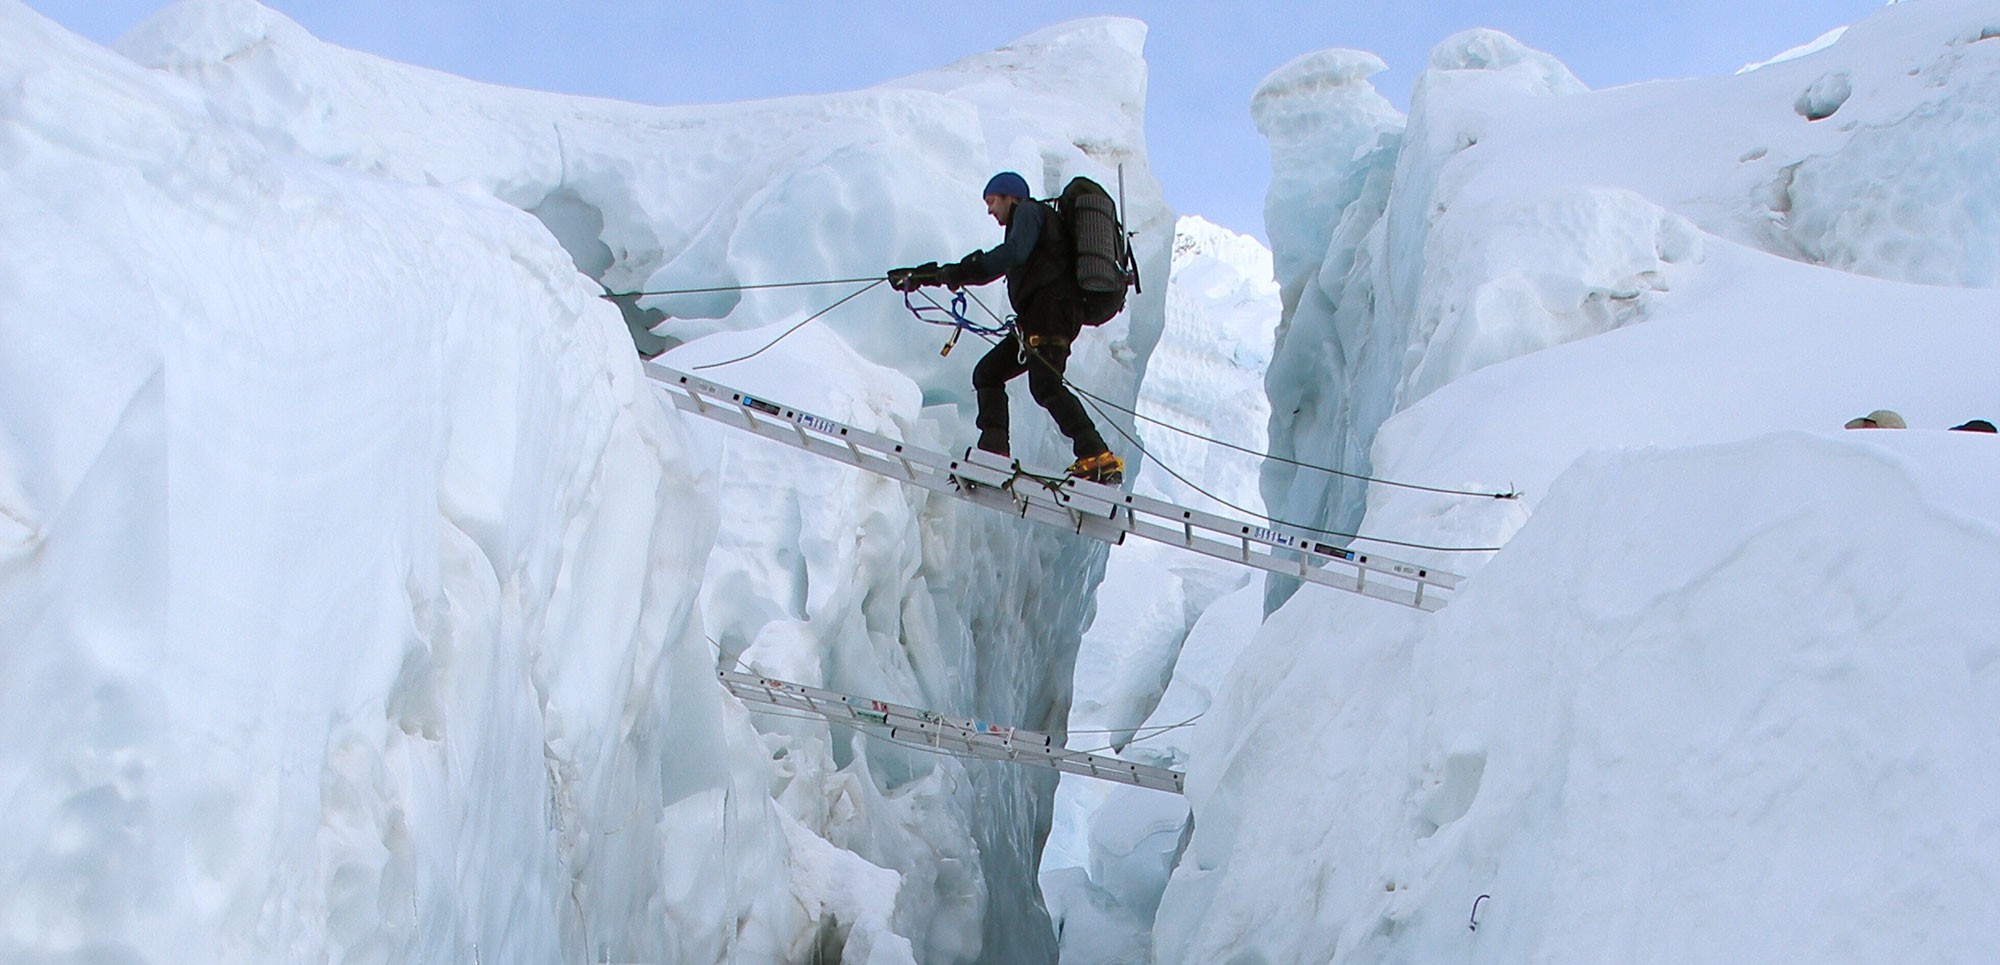 Tom Clowes crossing a crevasse in the Khumbu Icefall on Everest